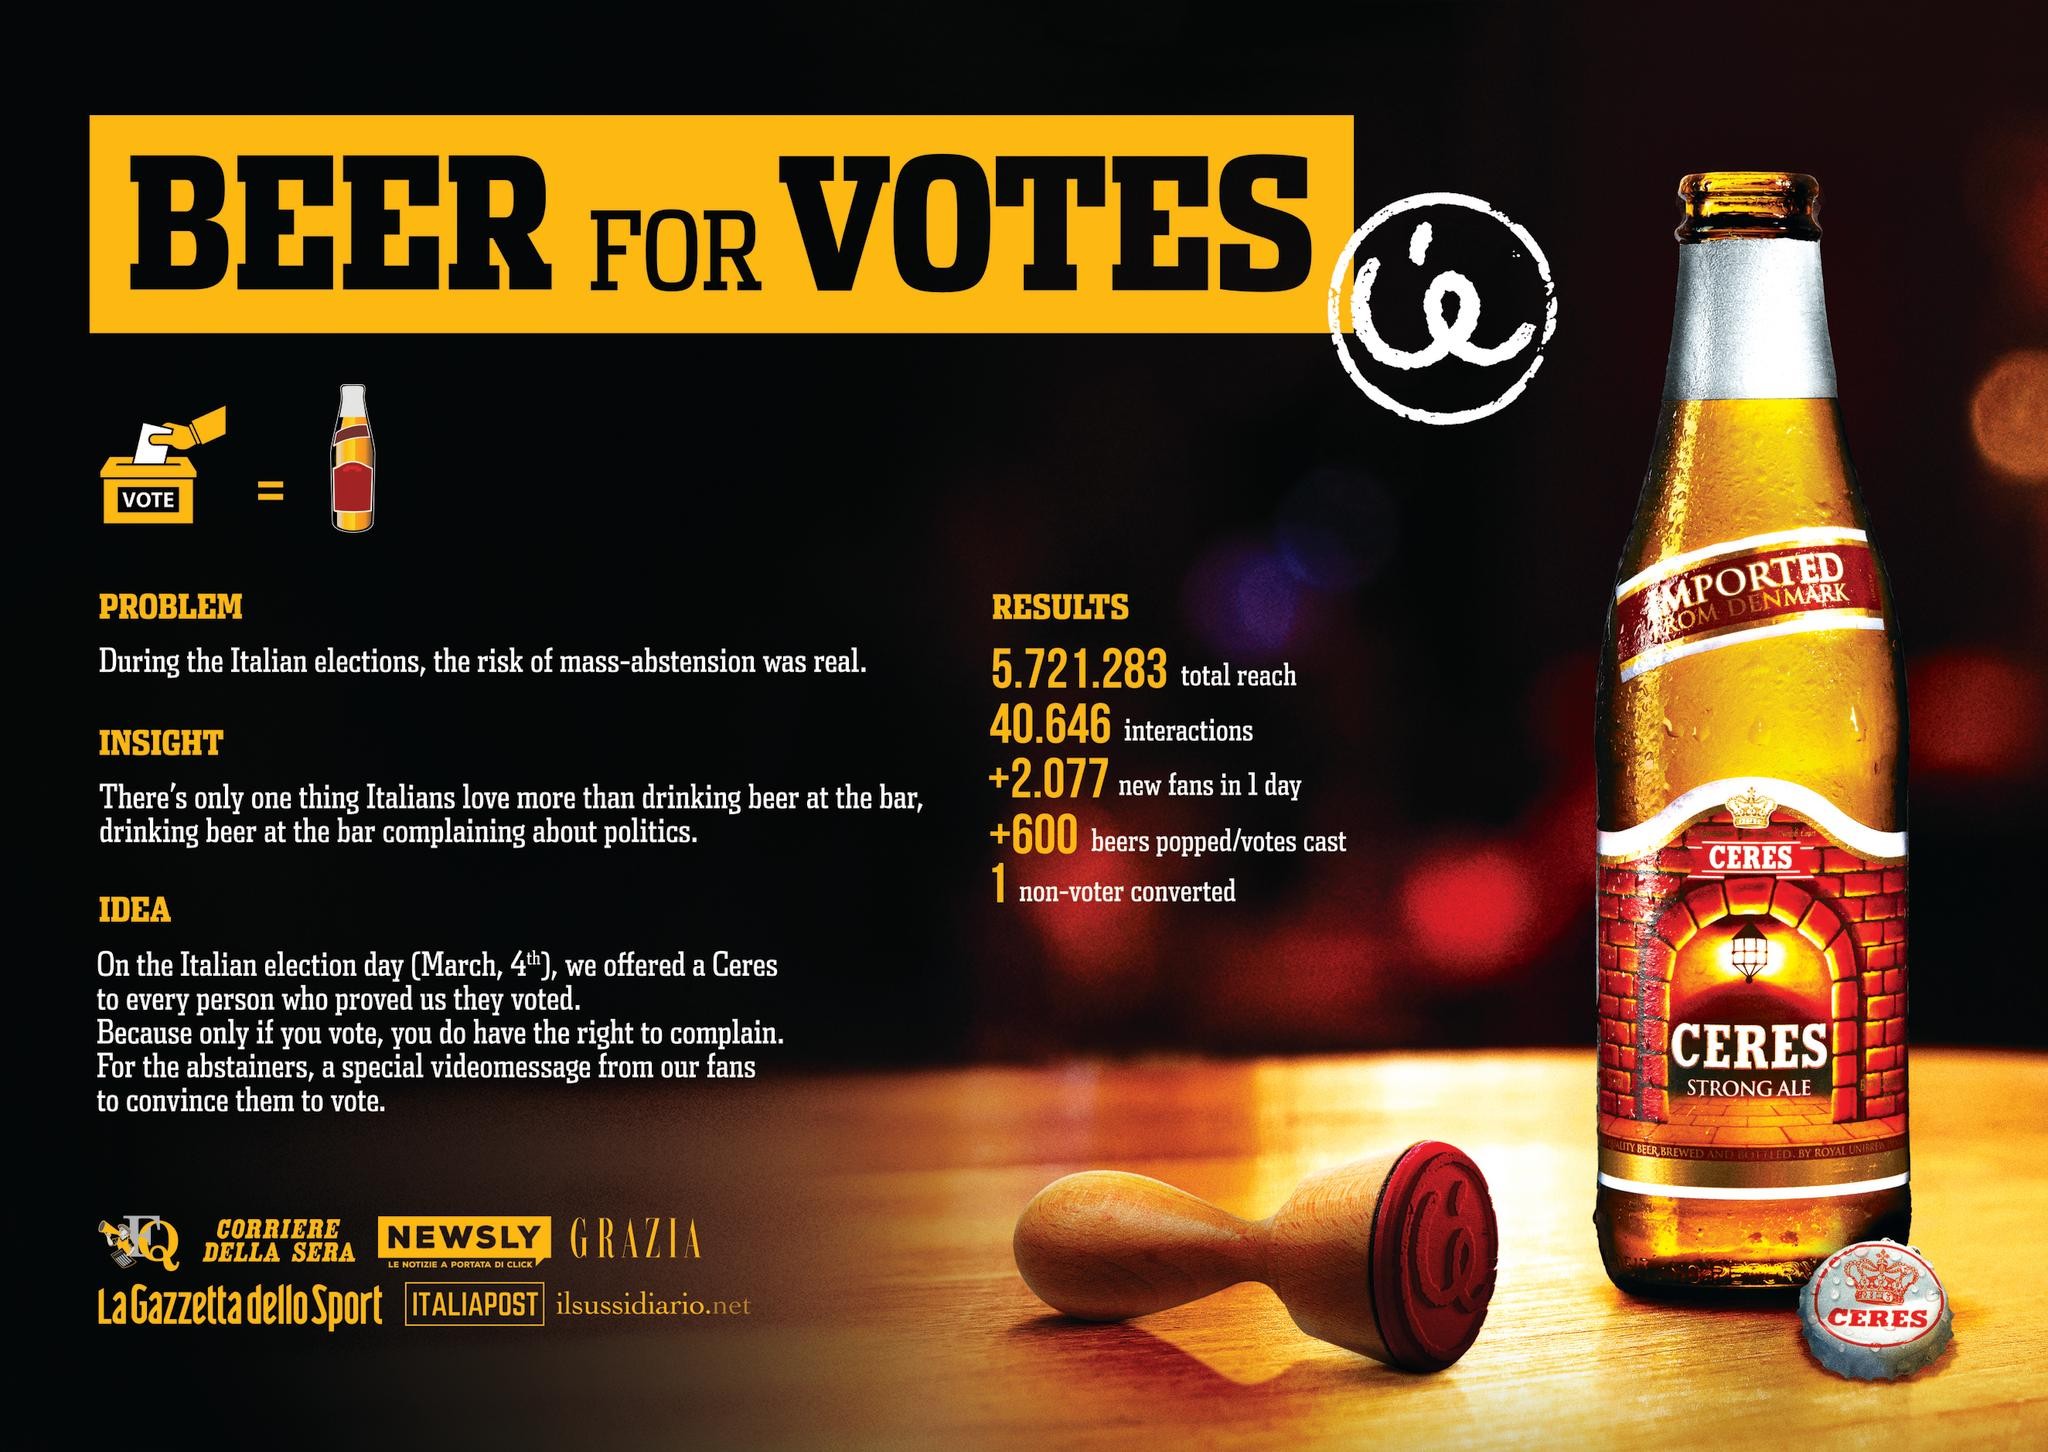 Beer for votes